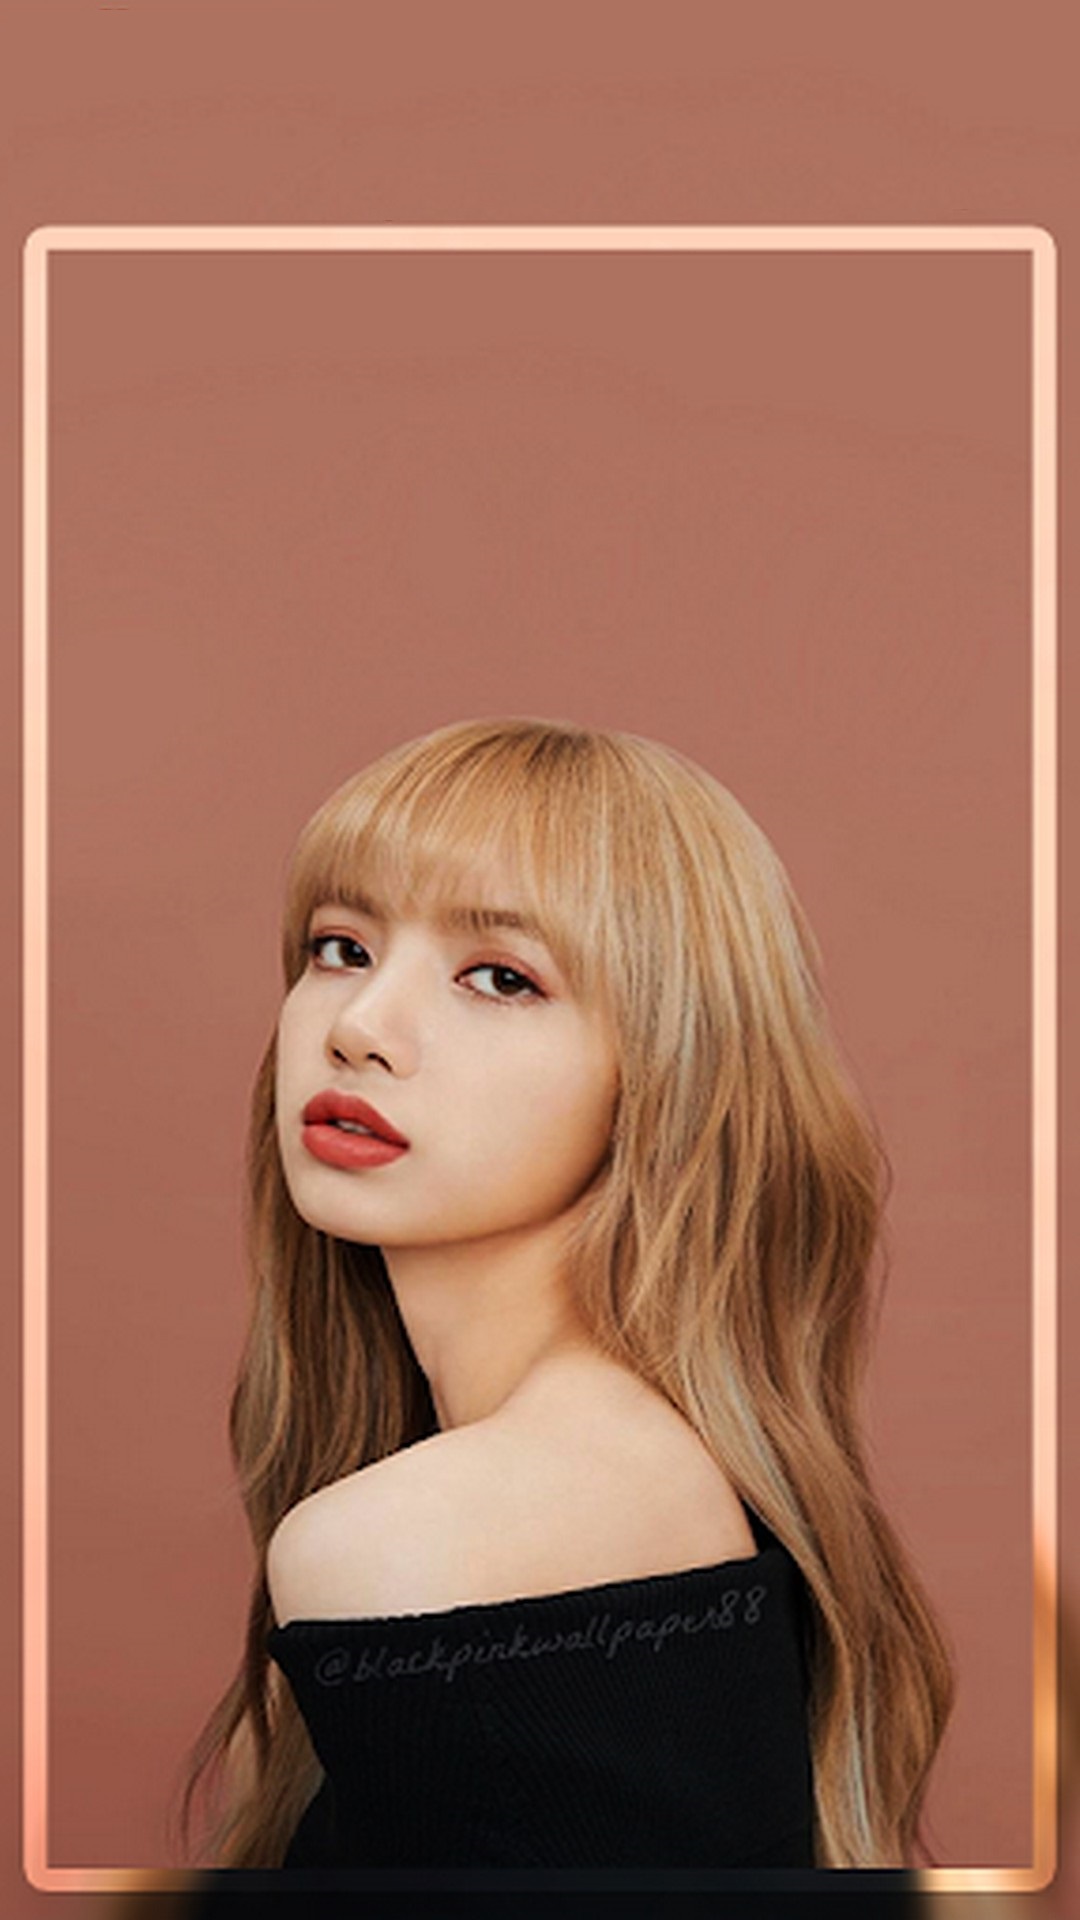 Lisa Blackpink iPhone X Wallpaper With high-resolution 1080X1920 pixel. You can use this wallpaper for your iPhone 5, 6, 7, 8, X, XS, XR backgrounds, Mobile Screensaver, or iPad Lock Screen